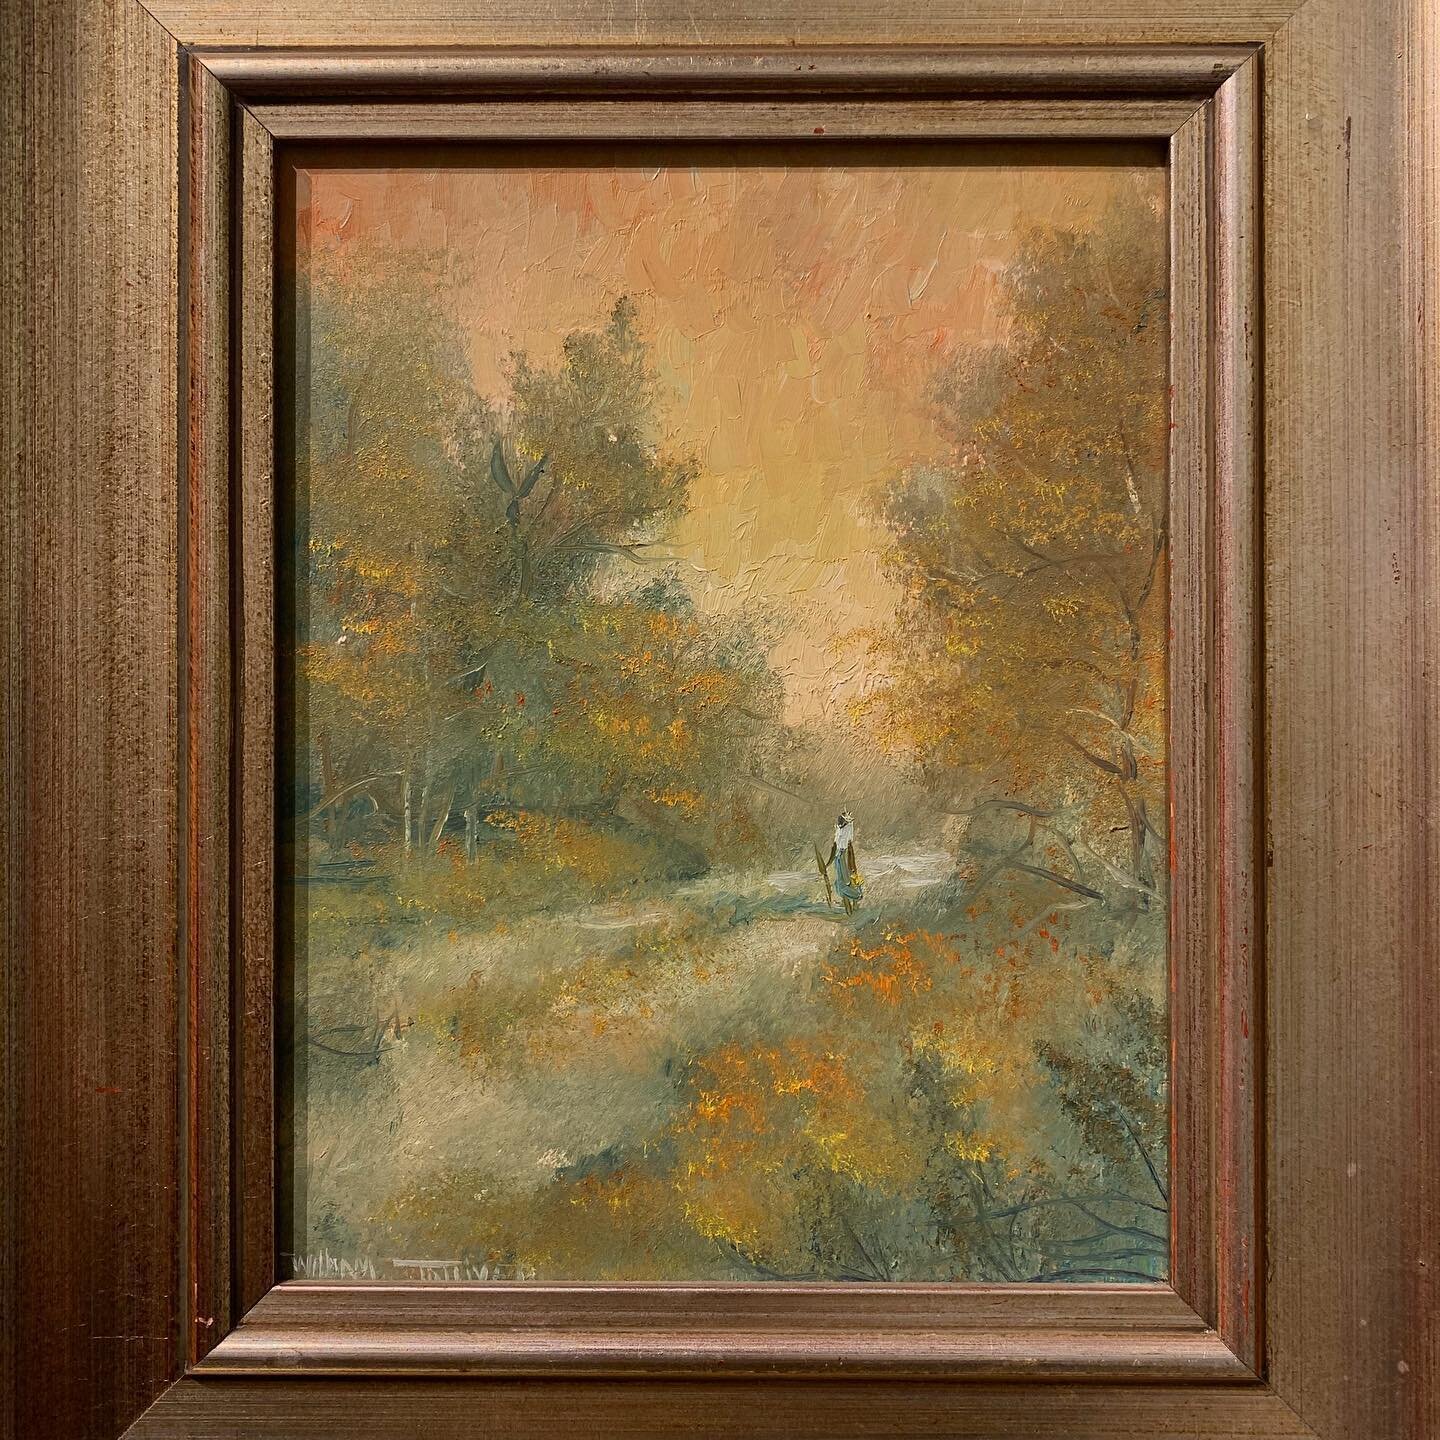 Landscape with Figure (Memories)
William Tolliver (1951-2000)

Sometimes it&rsquo;s the smallest details that captivate you... We are so lucky to have the most comprehensive collection of Tolliver pieces within our selection of Old Favorites. It&rsqu